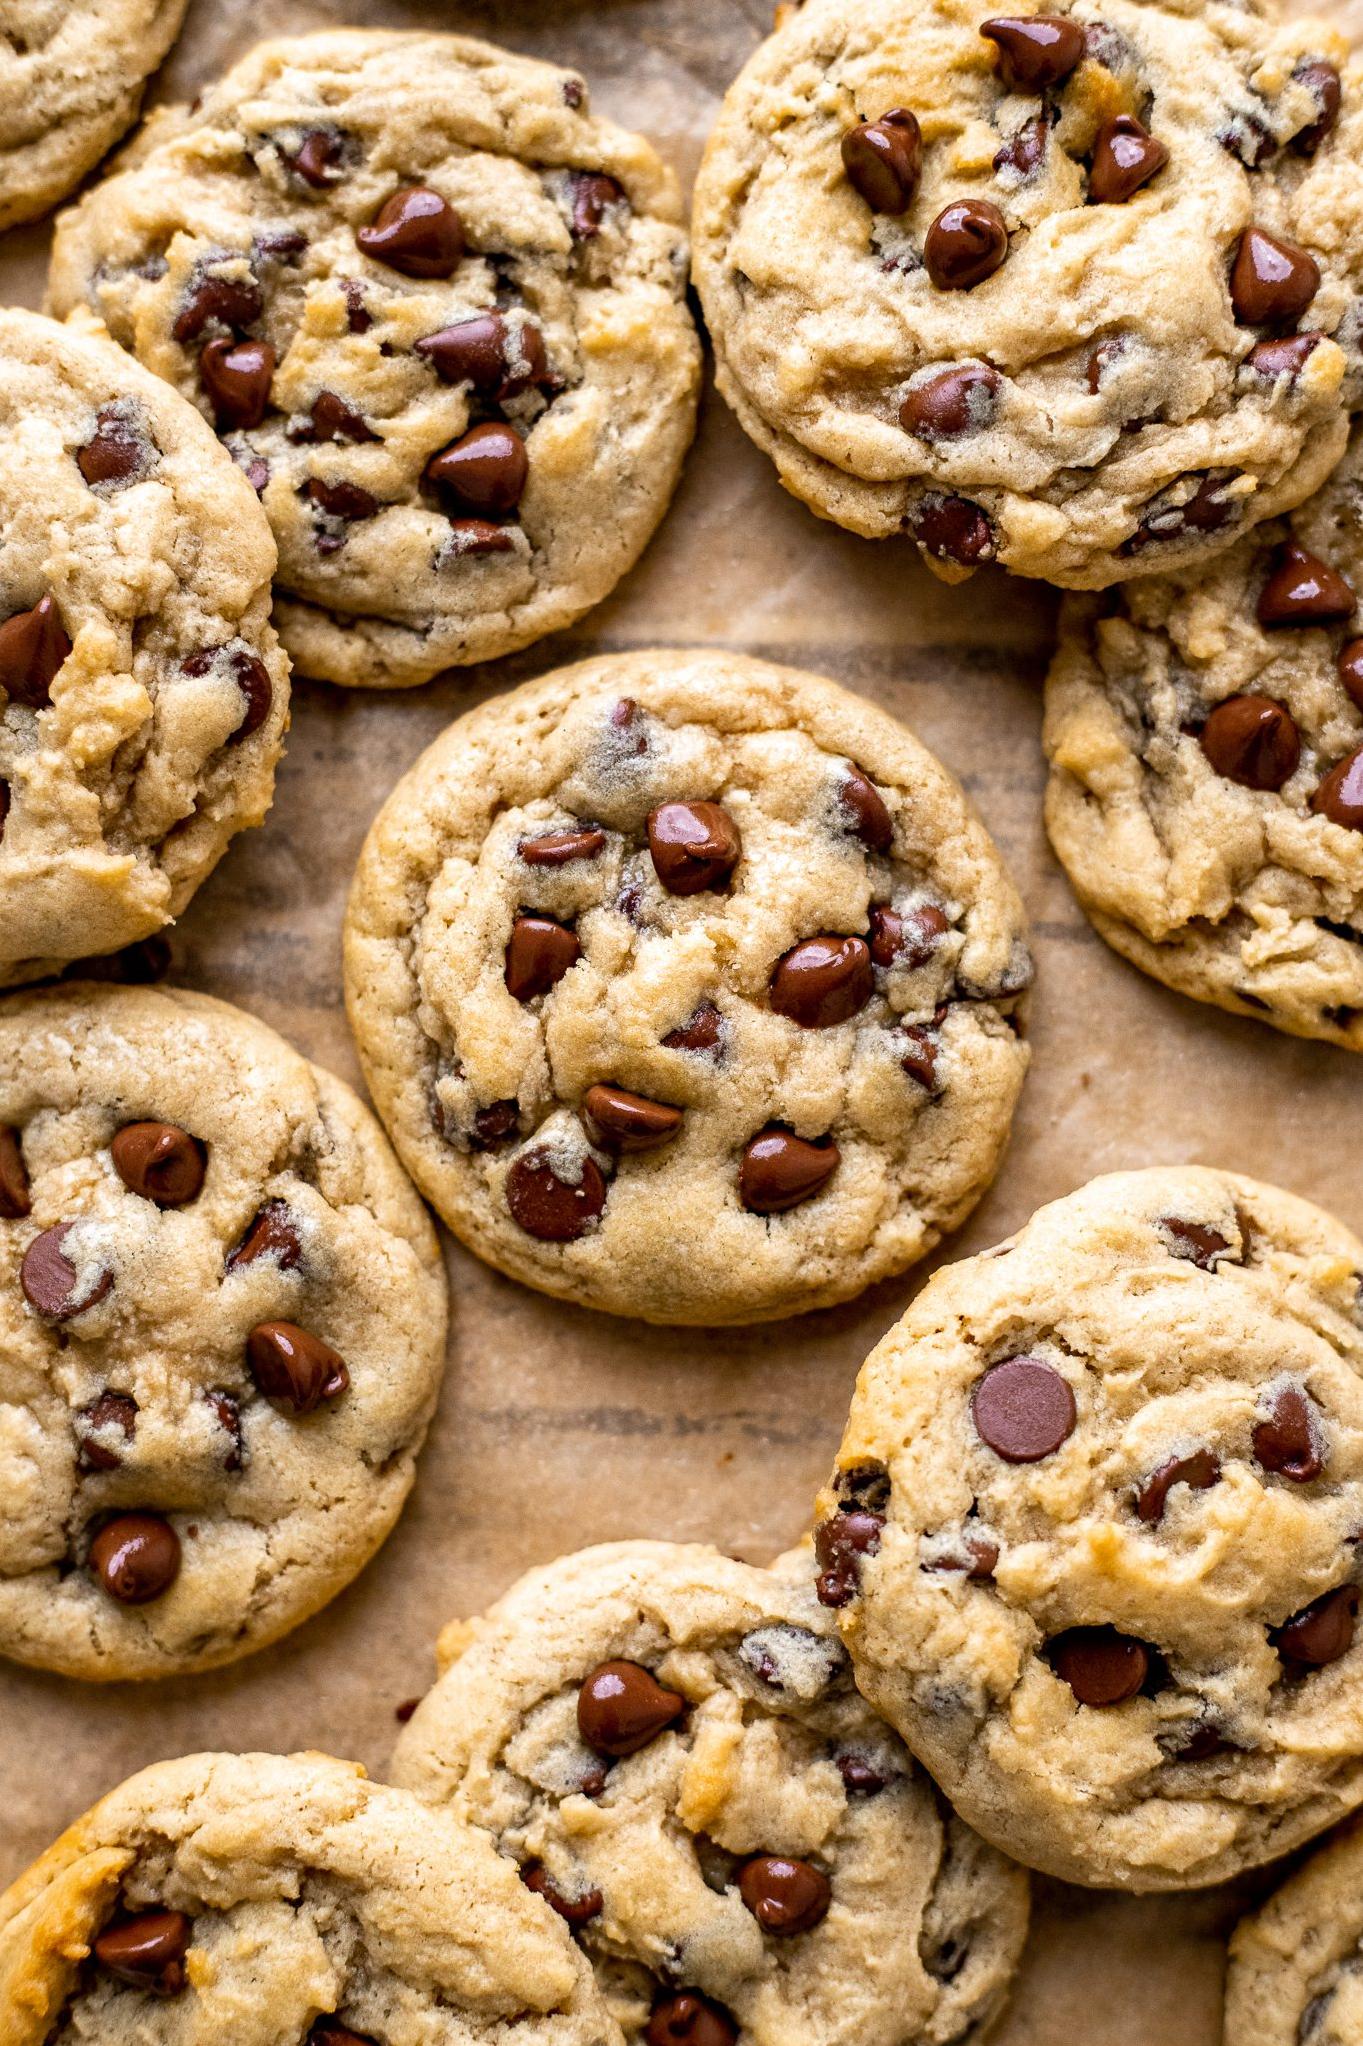  Enjoy a warm, gooey chocolate chip cookie that's vegan and wheat-free.